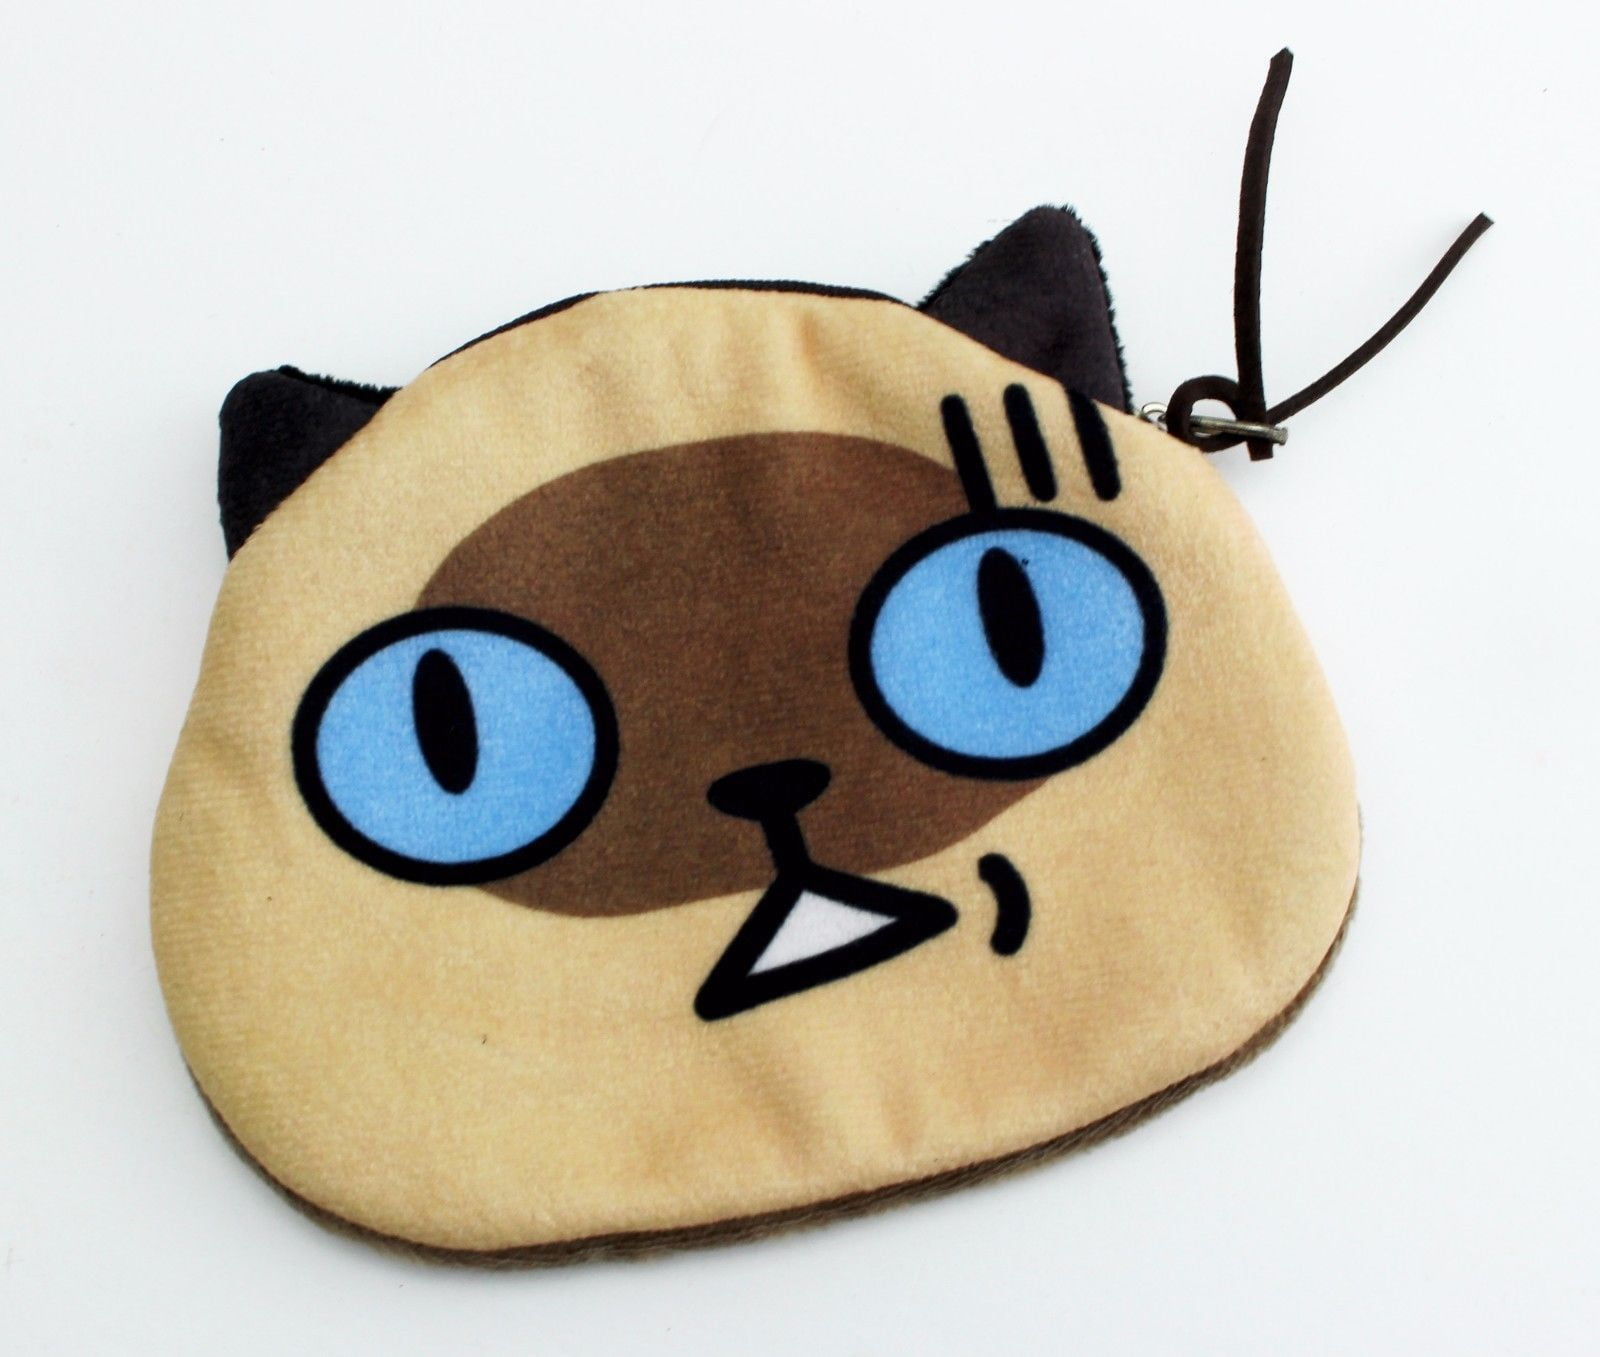 Cats Paw Pattern Leather Coin Purse Clasp Wallet for Women Girls Change Purse Pouch